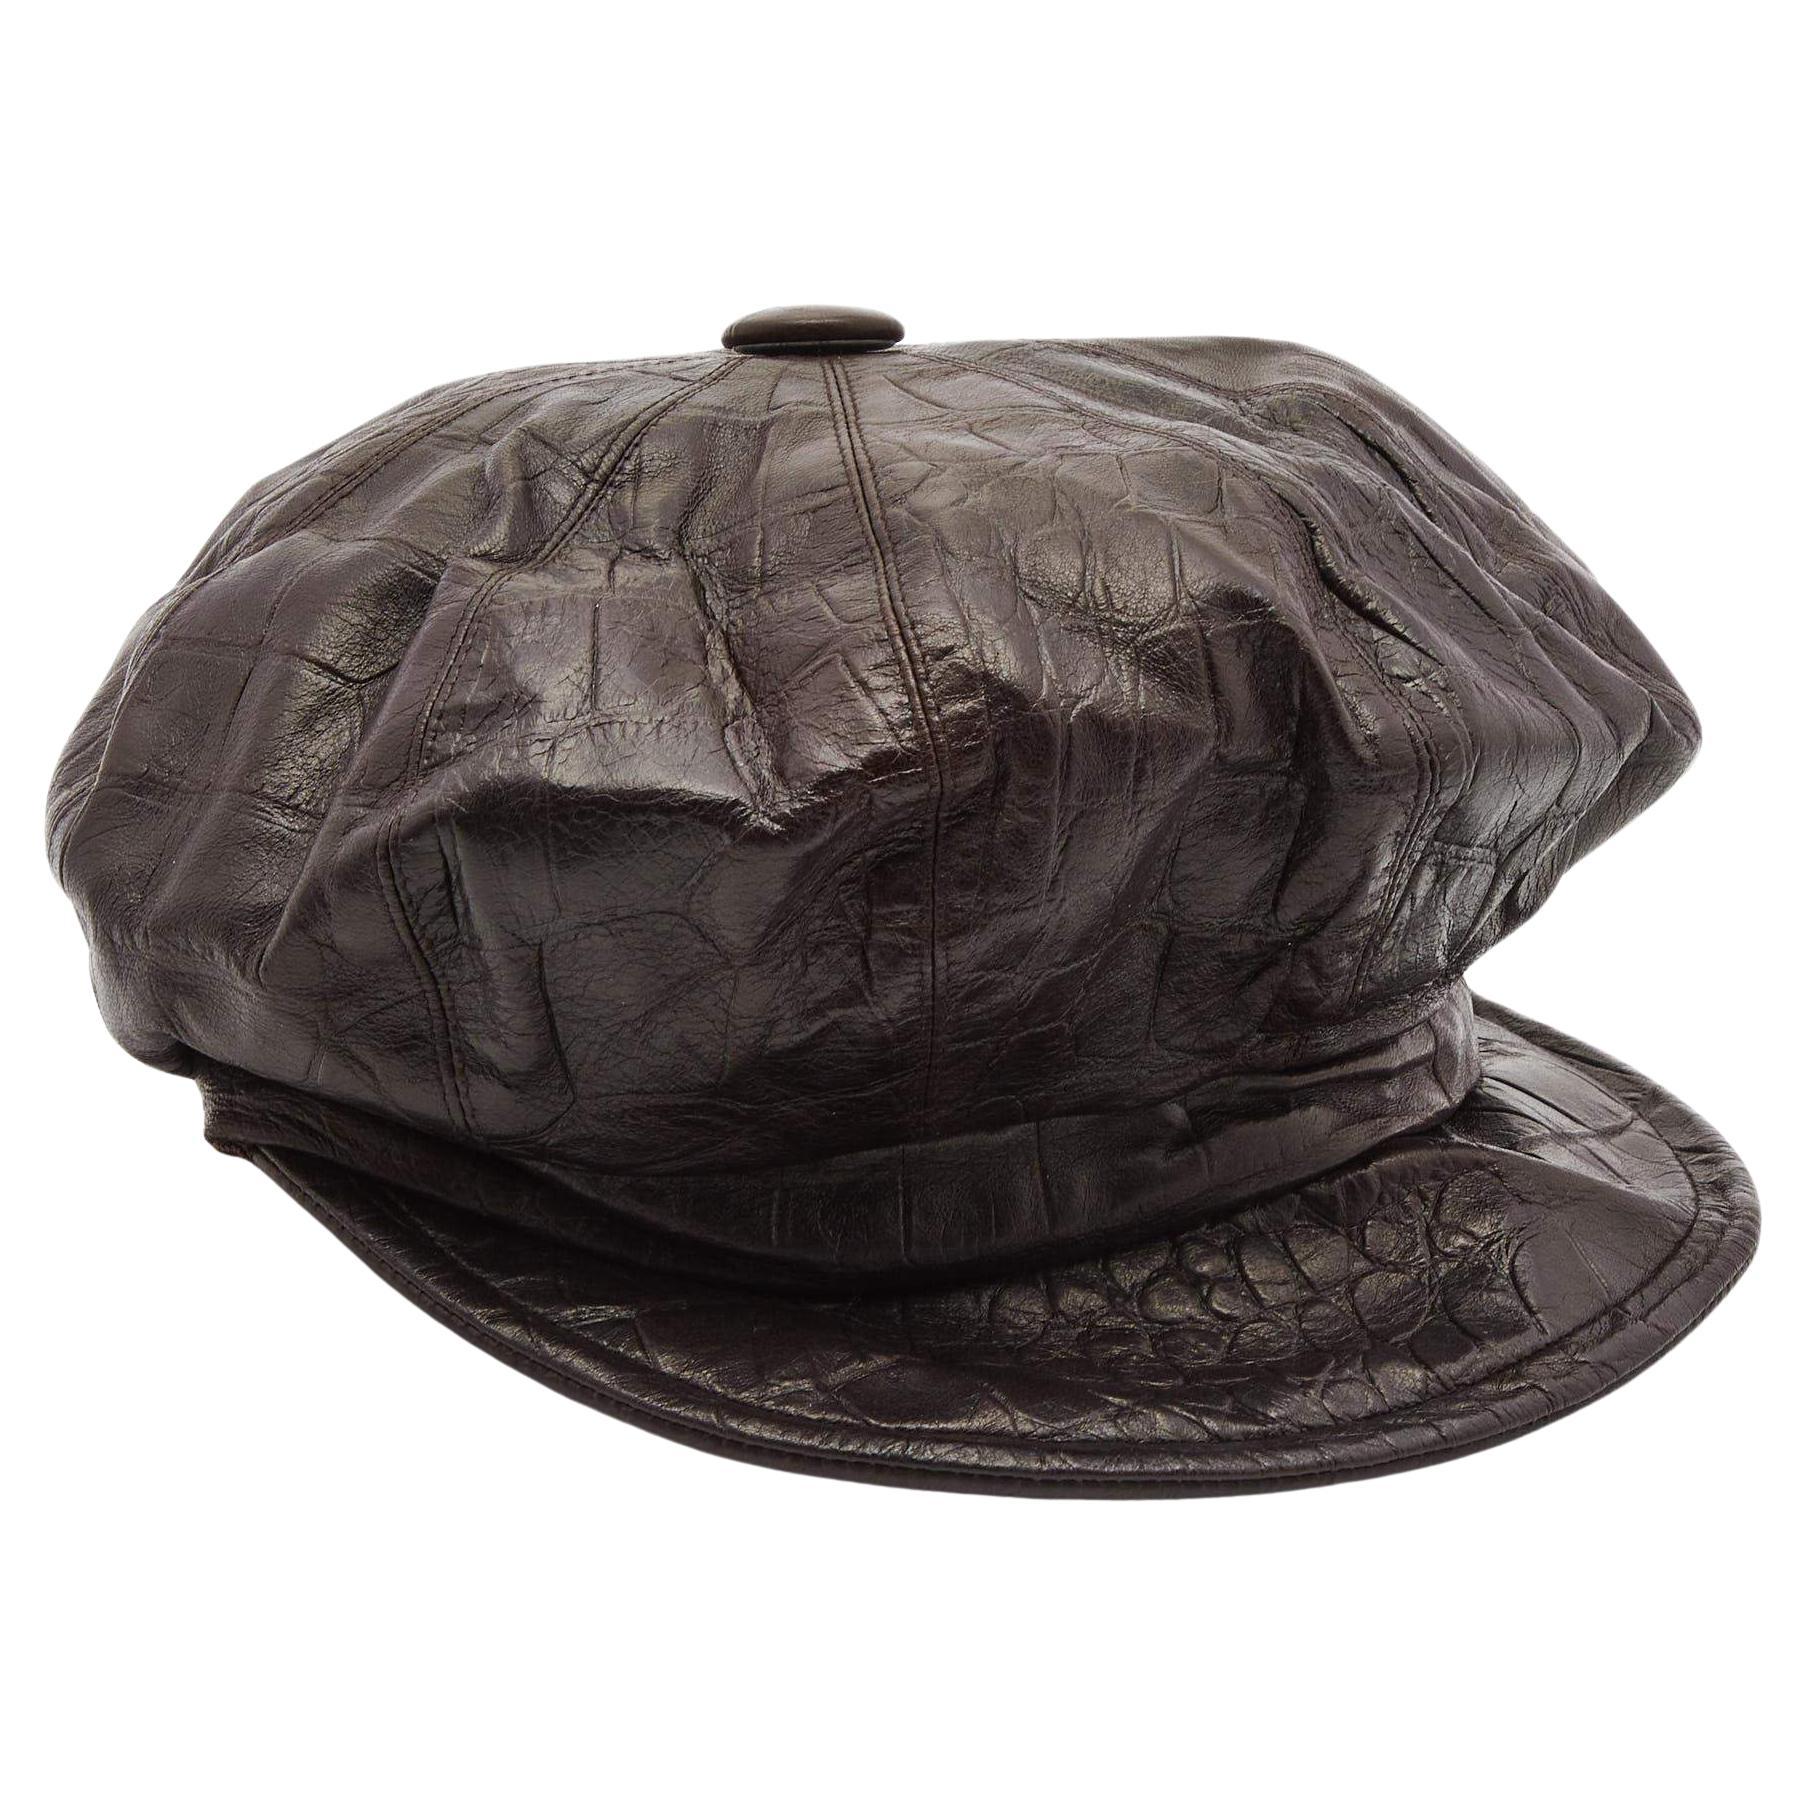 Christian Dior Boutique Brown Croc Embossed Leather Newsboy Hat Size 58 For Sale